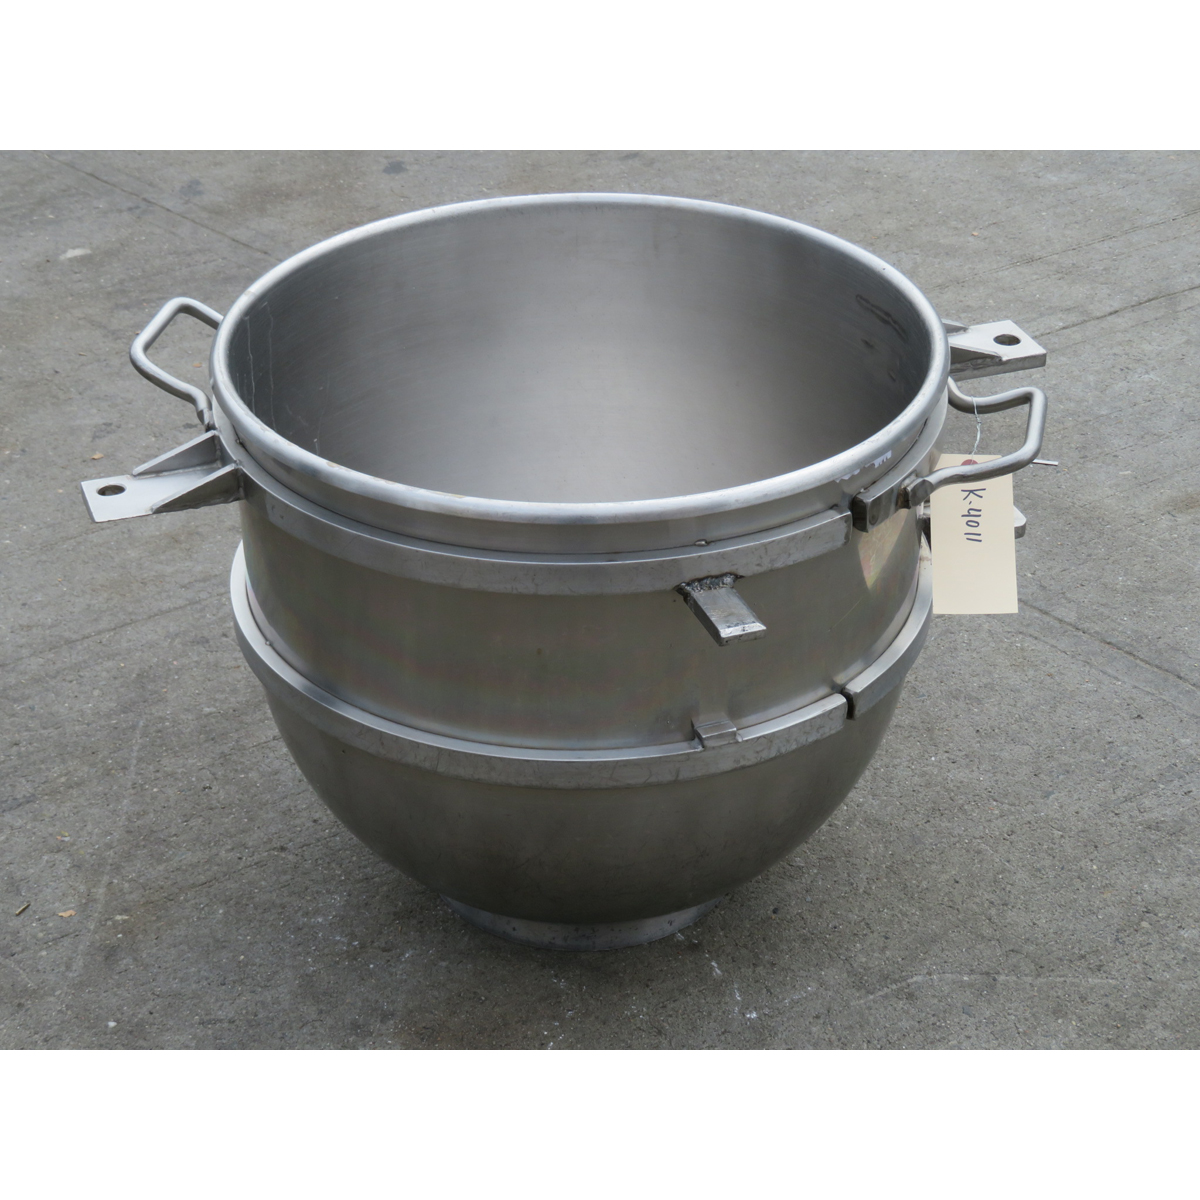 Hobart Legacy BOWL-HL80 80 Qt. Stainless Steel Bowl for HL800 Mixer, Used Great Condition image 1